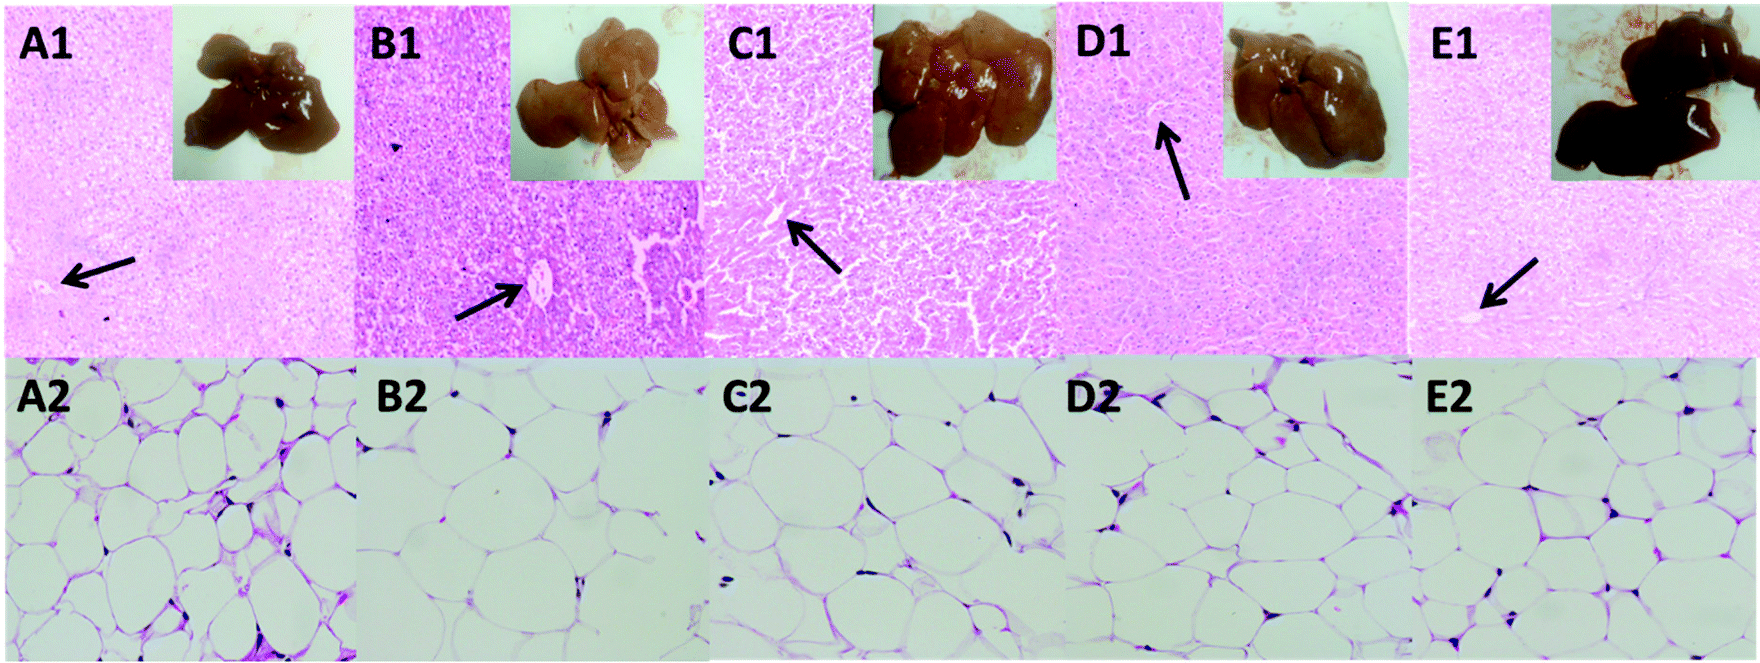 Retarding effect of dietary fibers from bamboo shoot (Phyllostachys edulis)  in hyperlipidemic rats induced by a high-fat diet - Food & Function (RSC  Publishing)